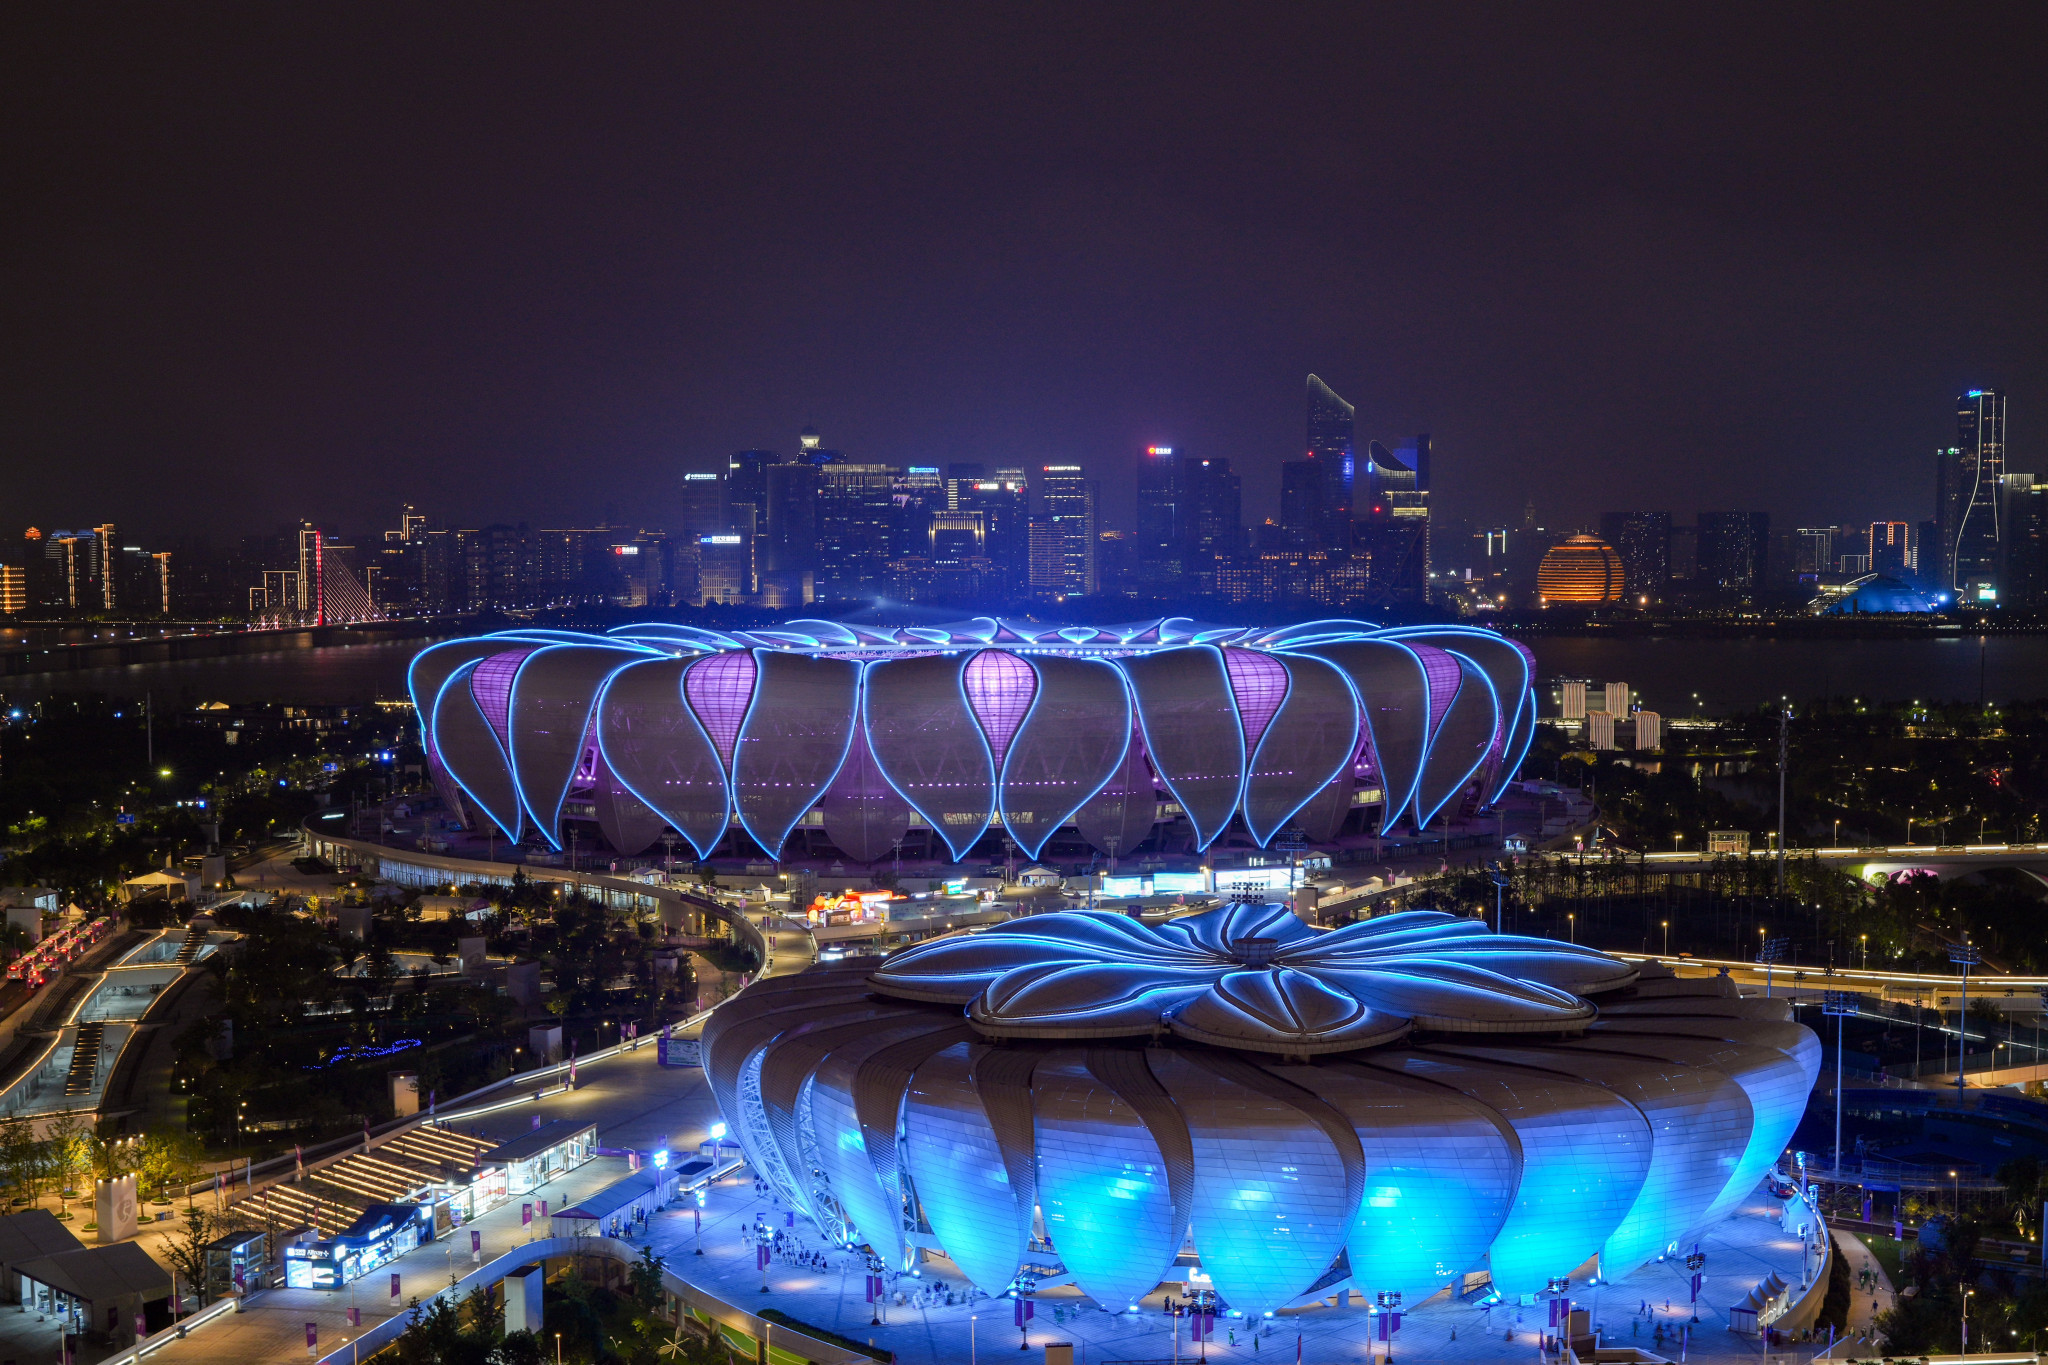 Hangzhou 2022 organisers claim to have created the first "smart Asian Games" ©Hangzhou 2022